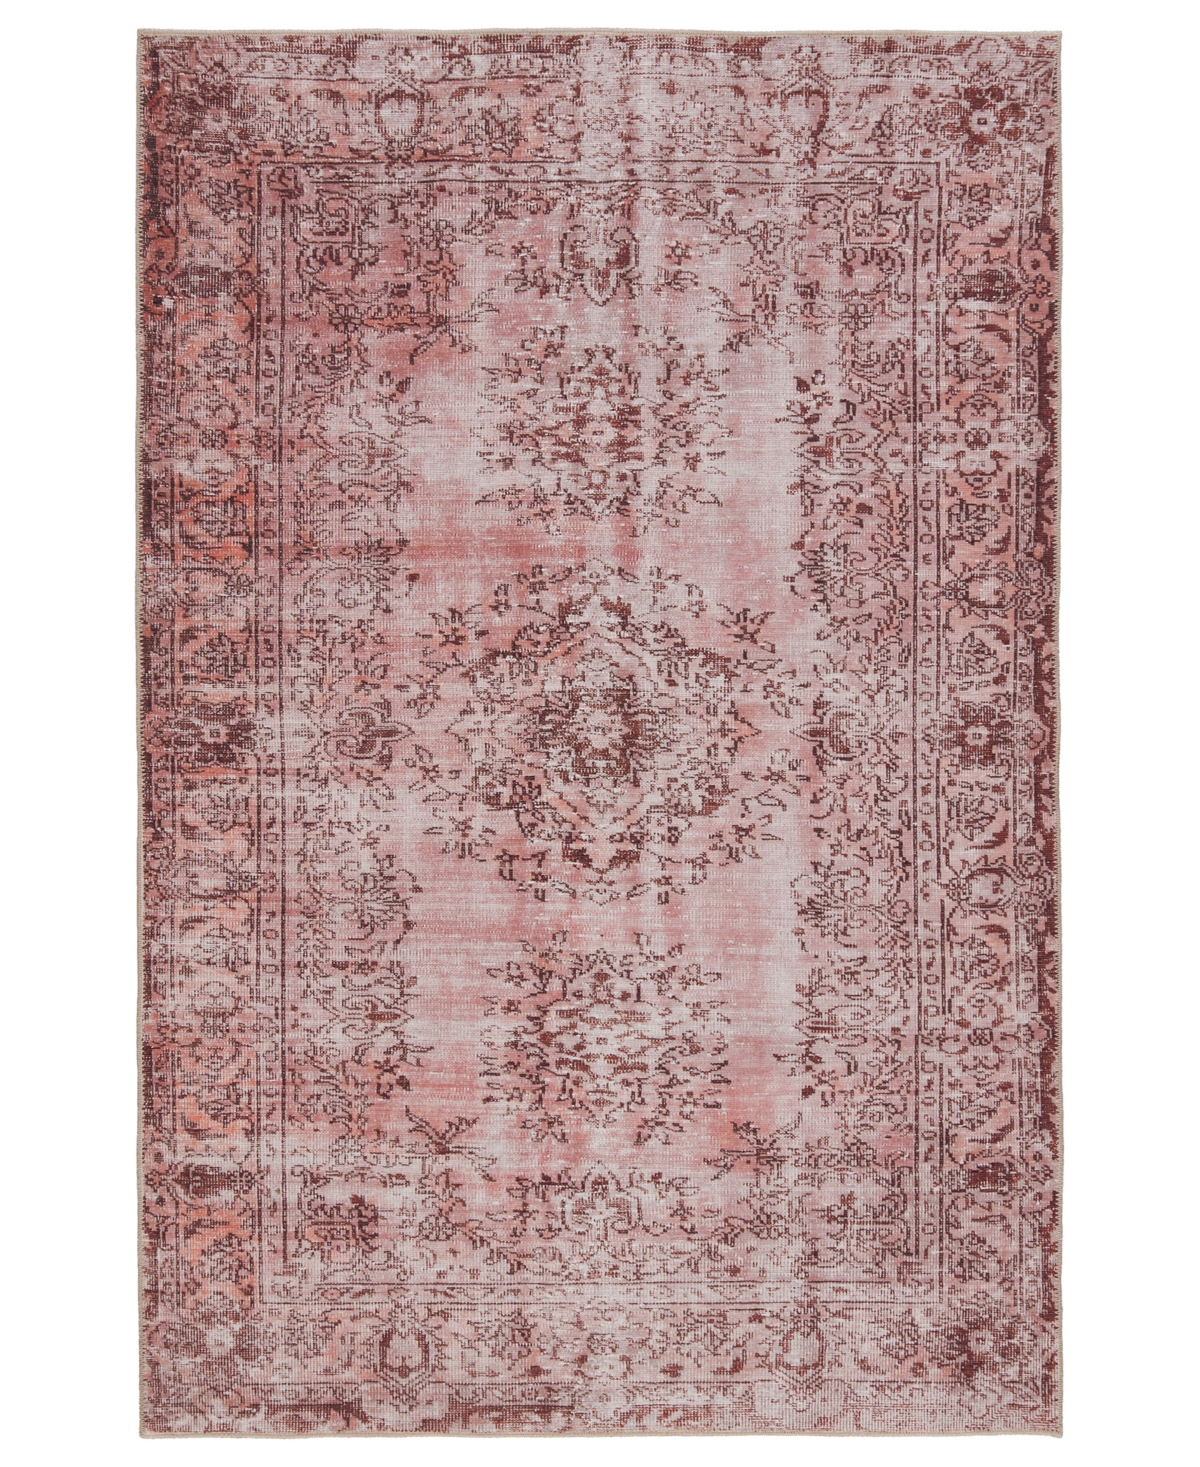 Kate Lester Harman HBL02 5' x 7'6in Area Rug - Pink